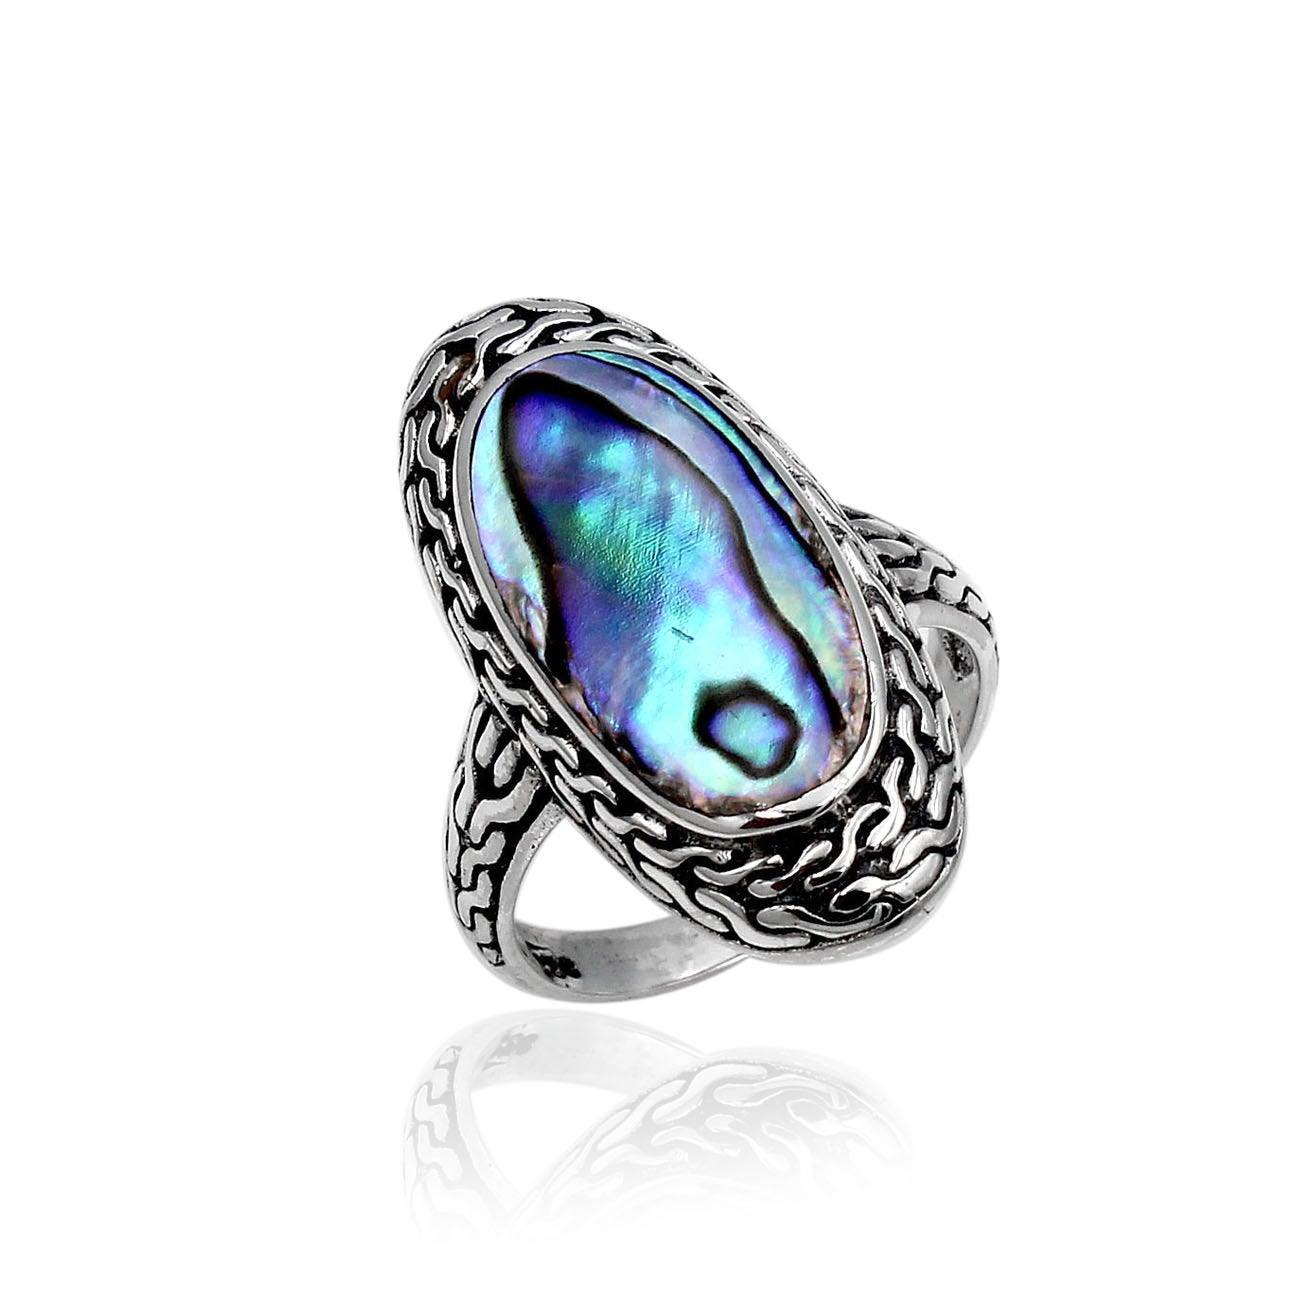 Handmade Abalone Shell Inlay Cocktail Ring in 925 Sterling Silver - Size L , M , N , O , P , Q - Inspiring Jewellery